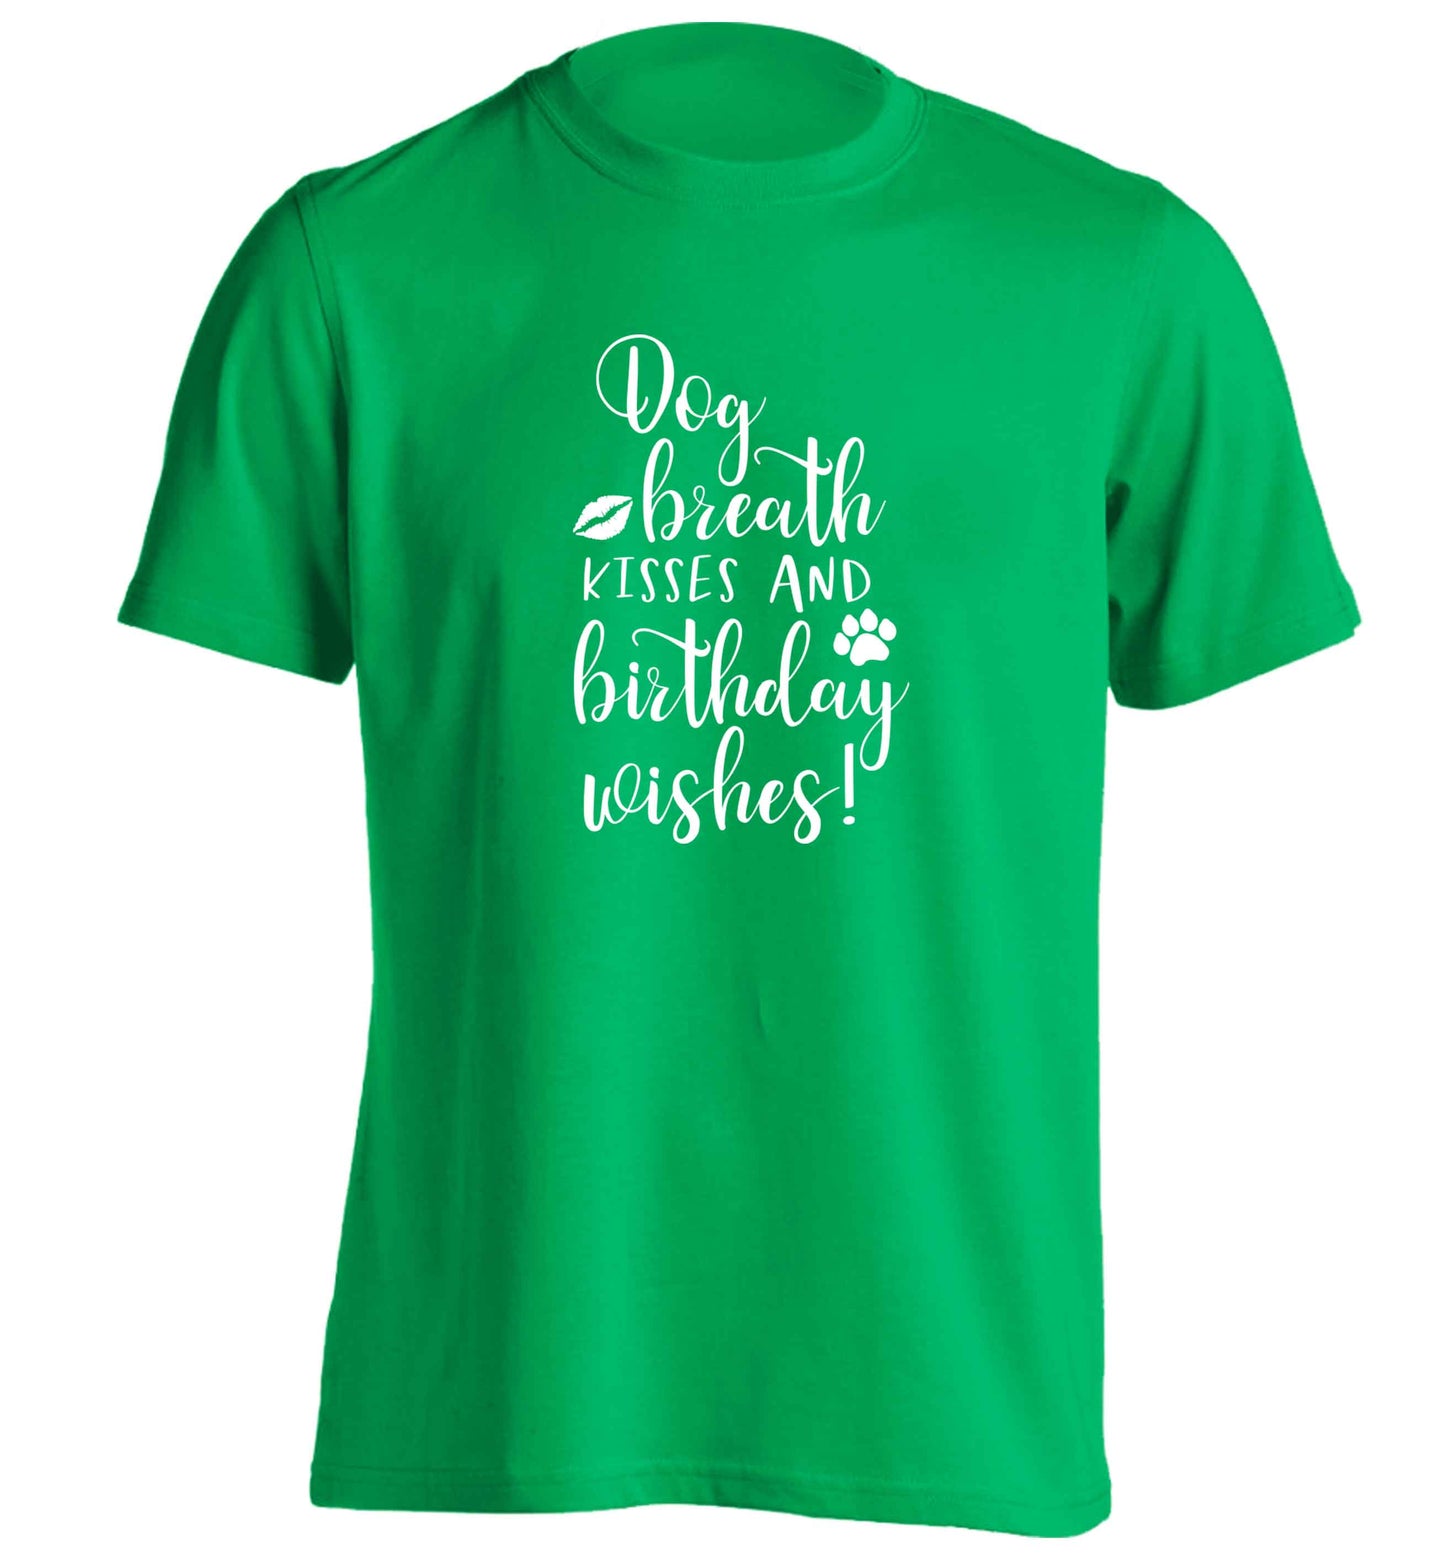 Dog breath kisses and christmas wishes adults unisex green Tshirt 2XL